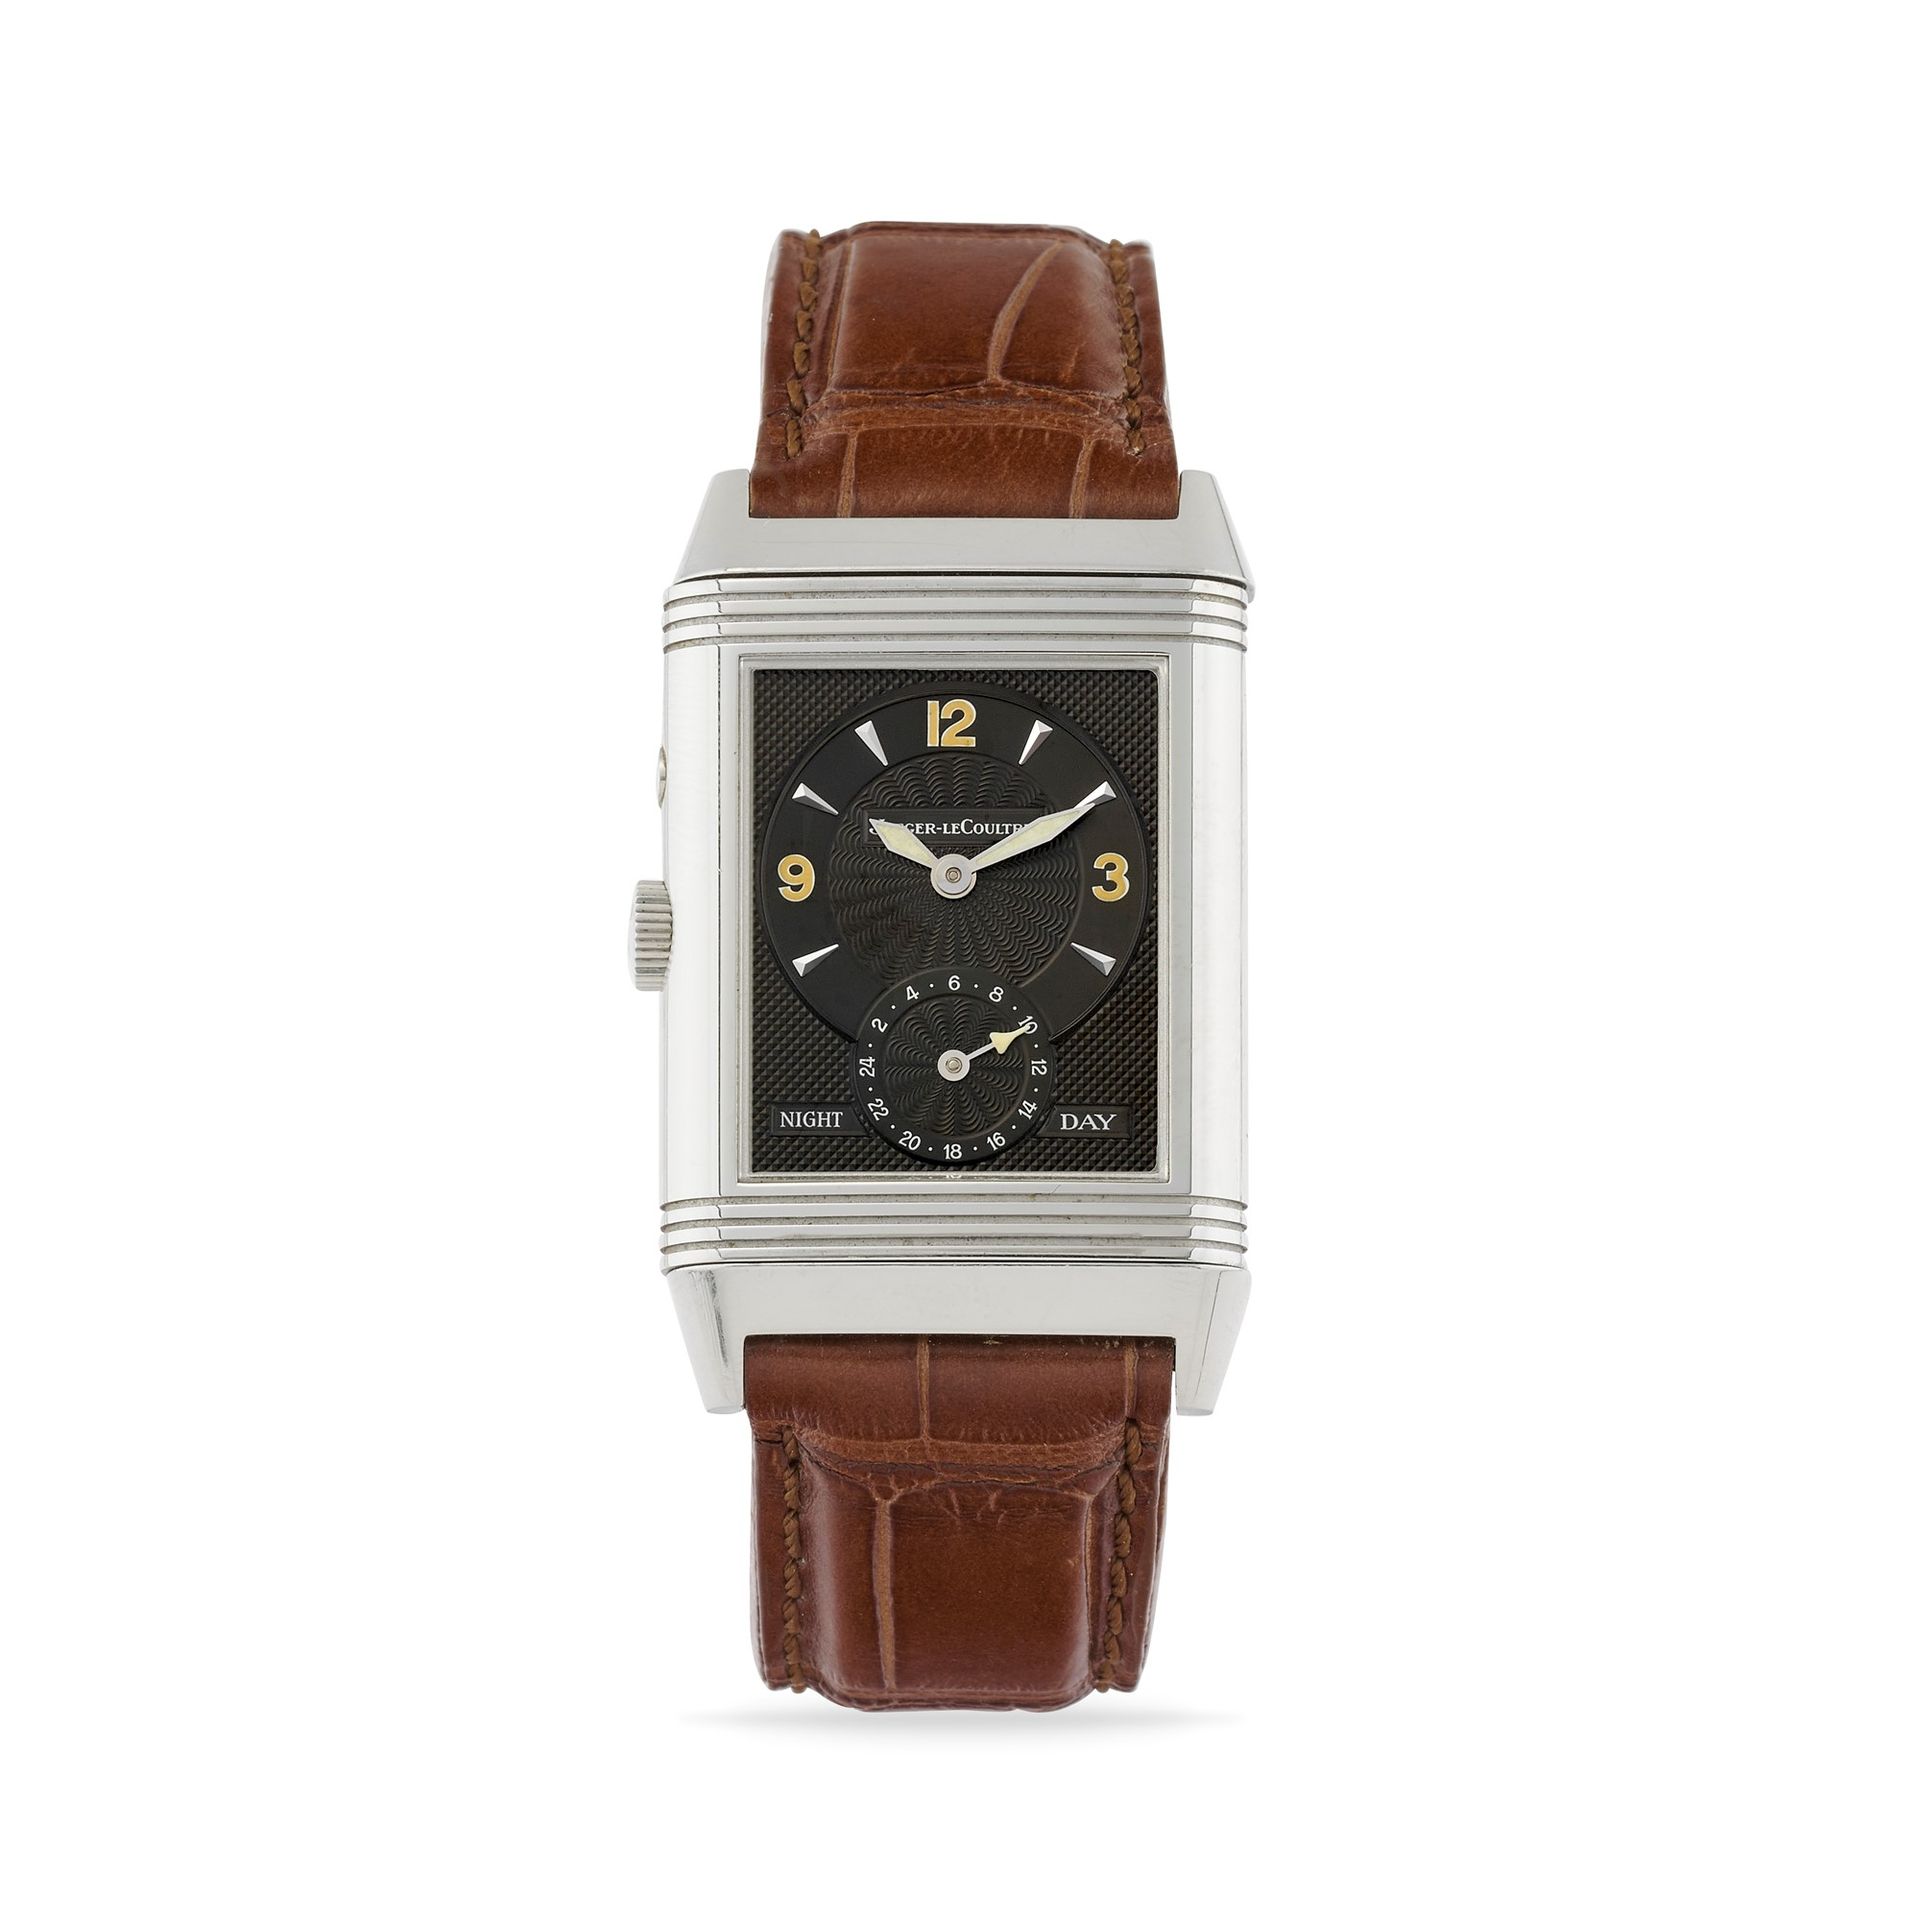 JAEGER-LECOULTRE Jaeger-LeCoultre Reverso Duoface Night & Day 270854, anni '90 
&hellip;